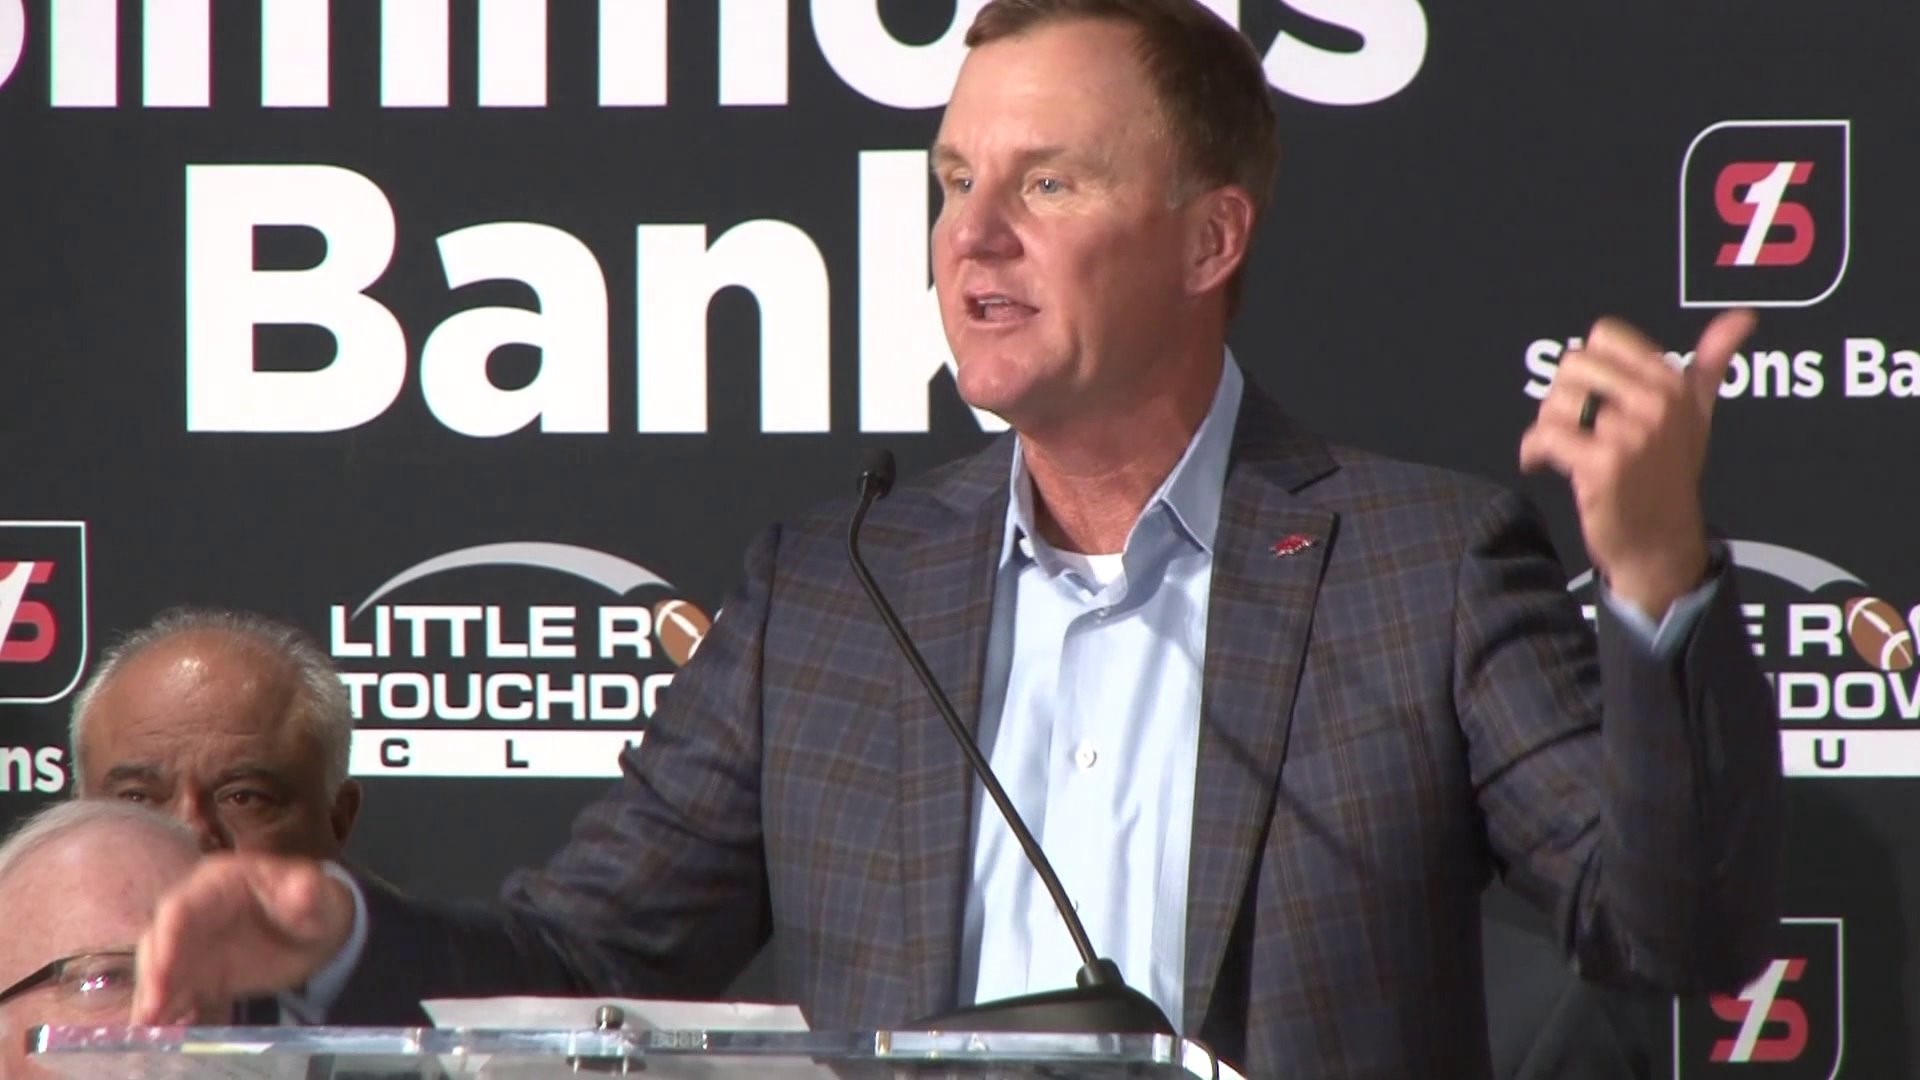 Chad Morris at the Little Rock TD Club